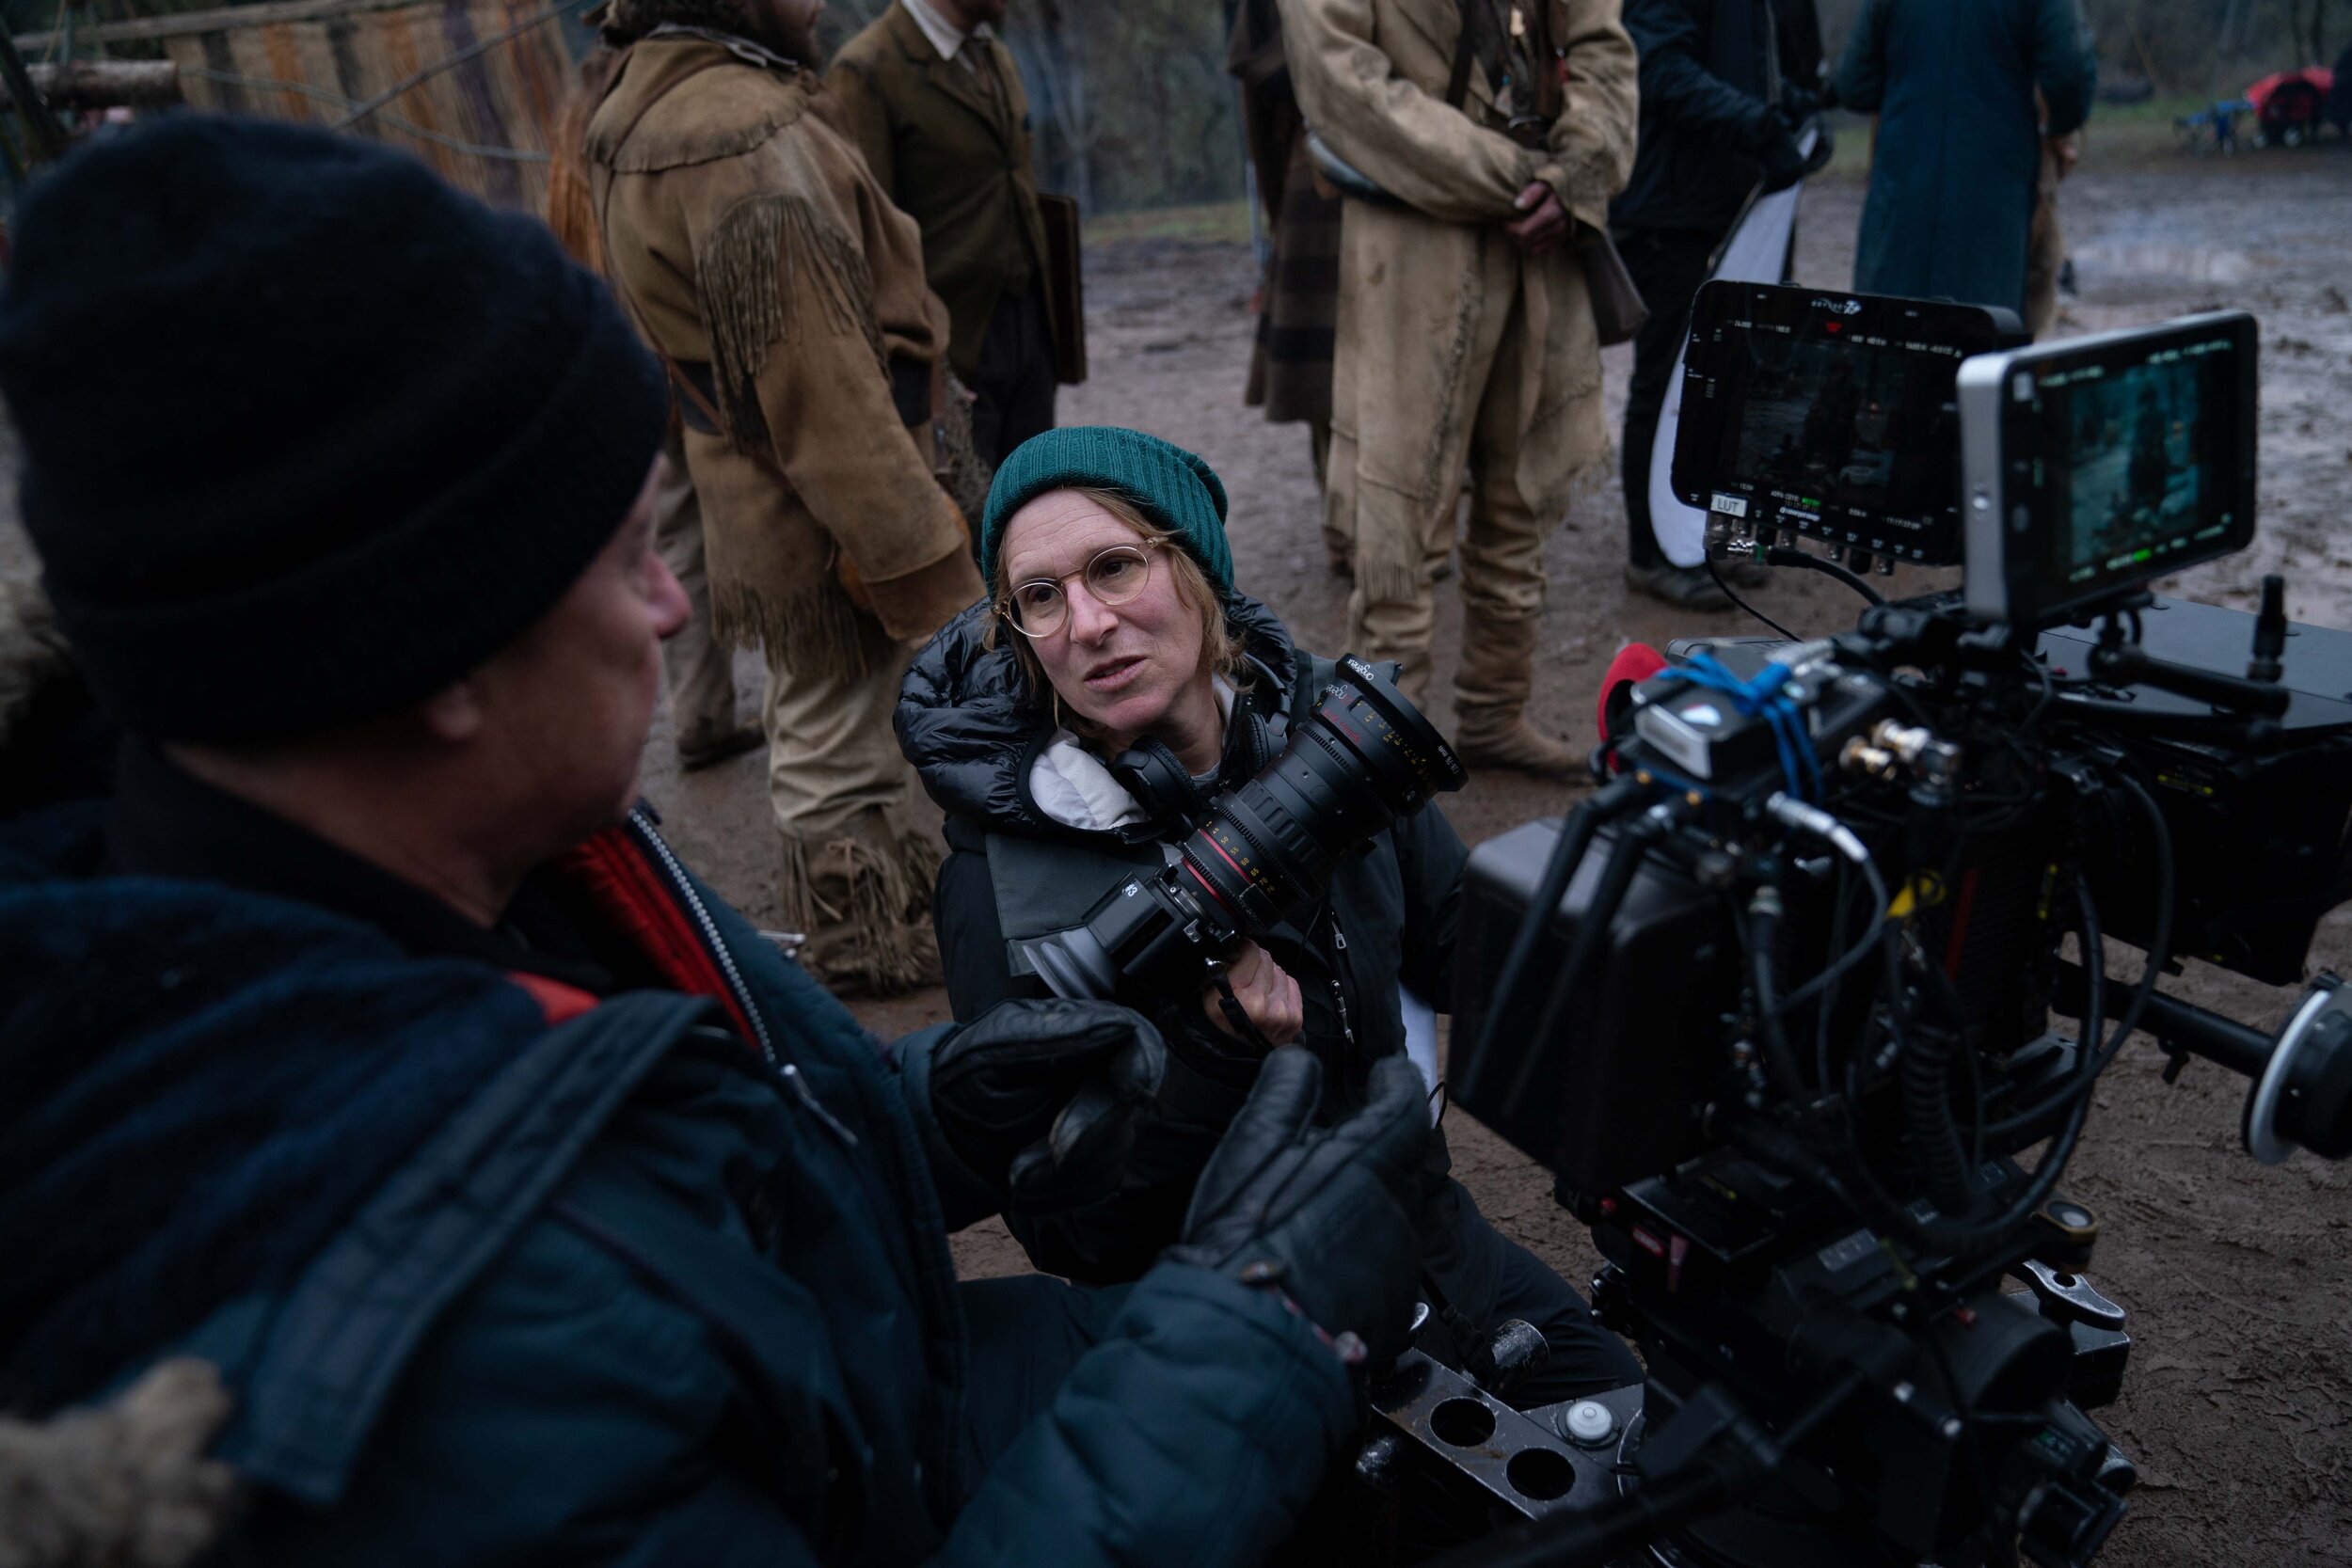  Director Kelly Reichardt on the set of  First Cow,  A24 